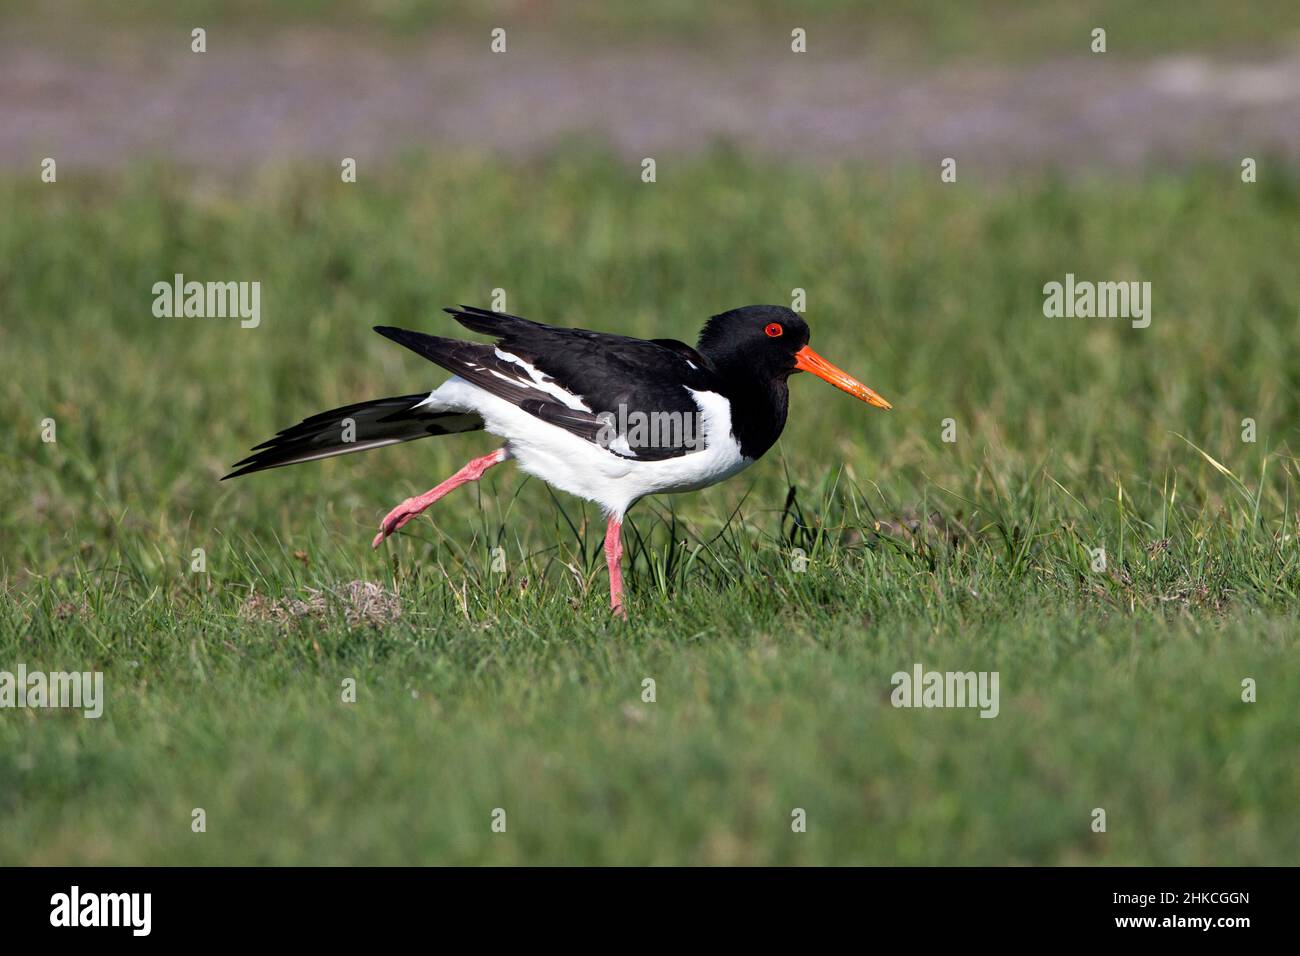 Oystercatcher (Haematopus ostralegus) stretching wing muscles, Island of Texel, Holland, Europe Stock Photo